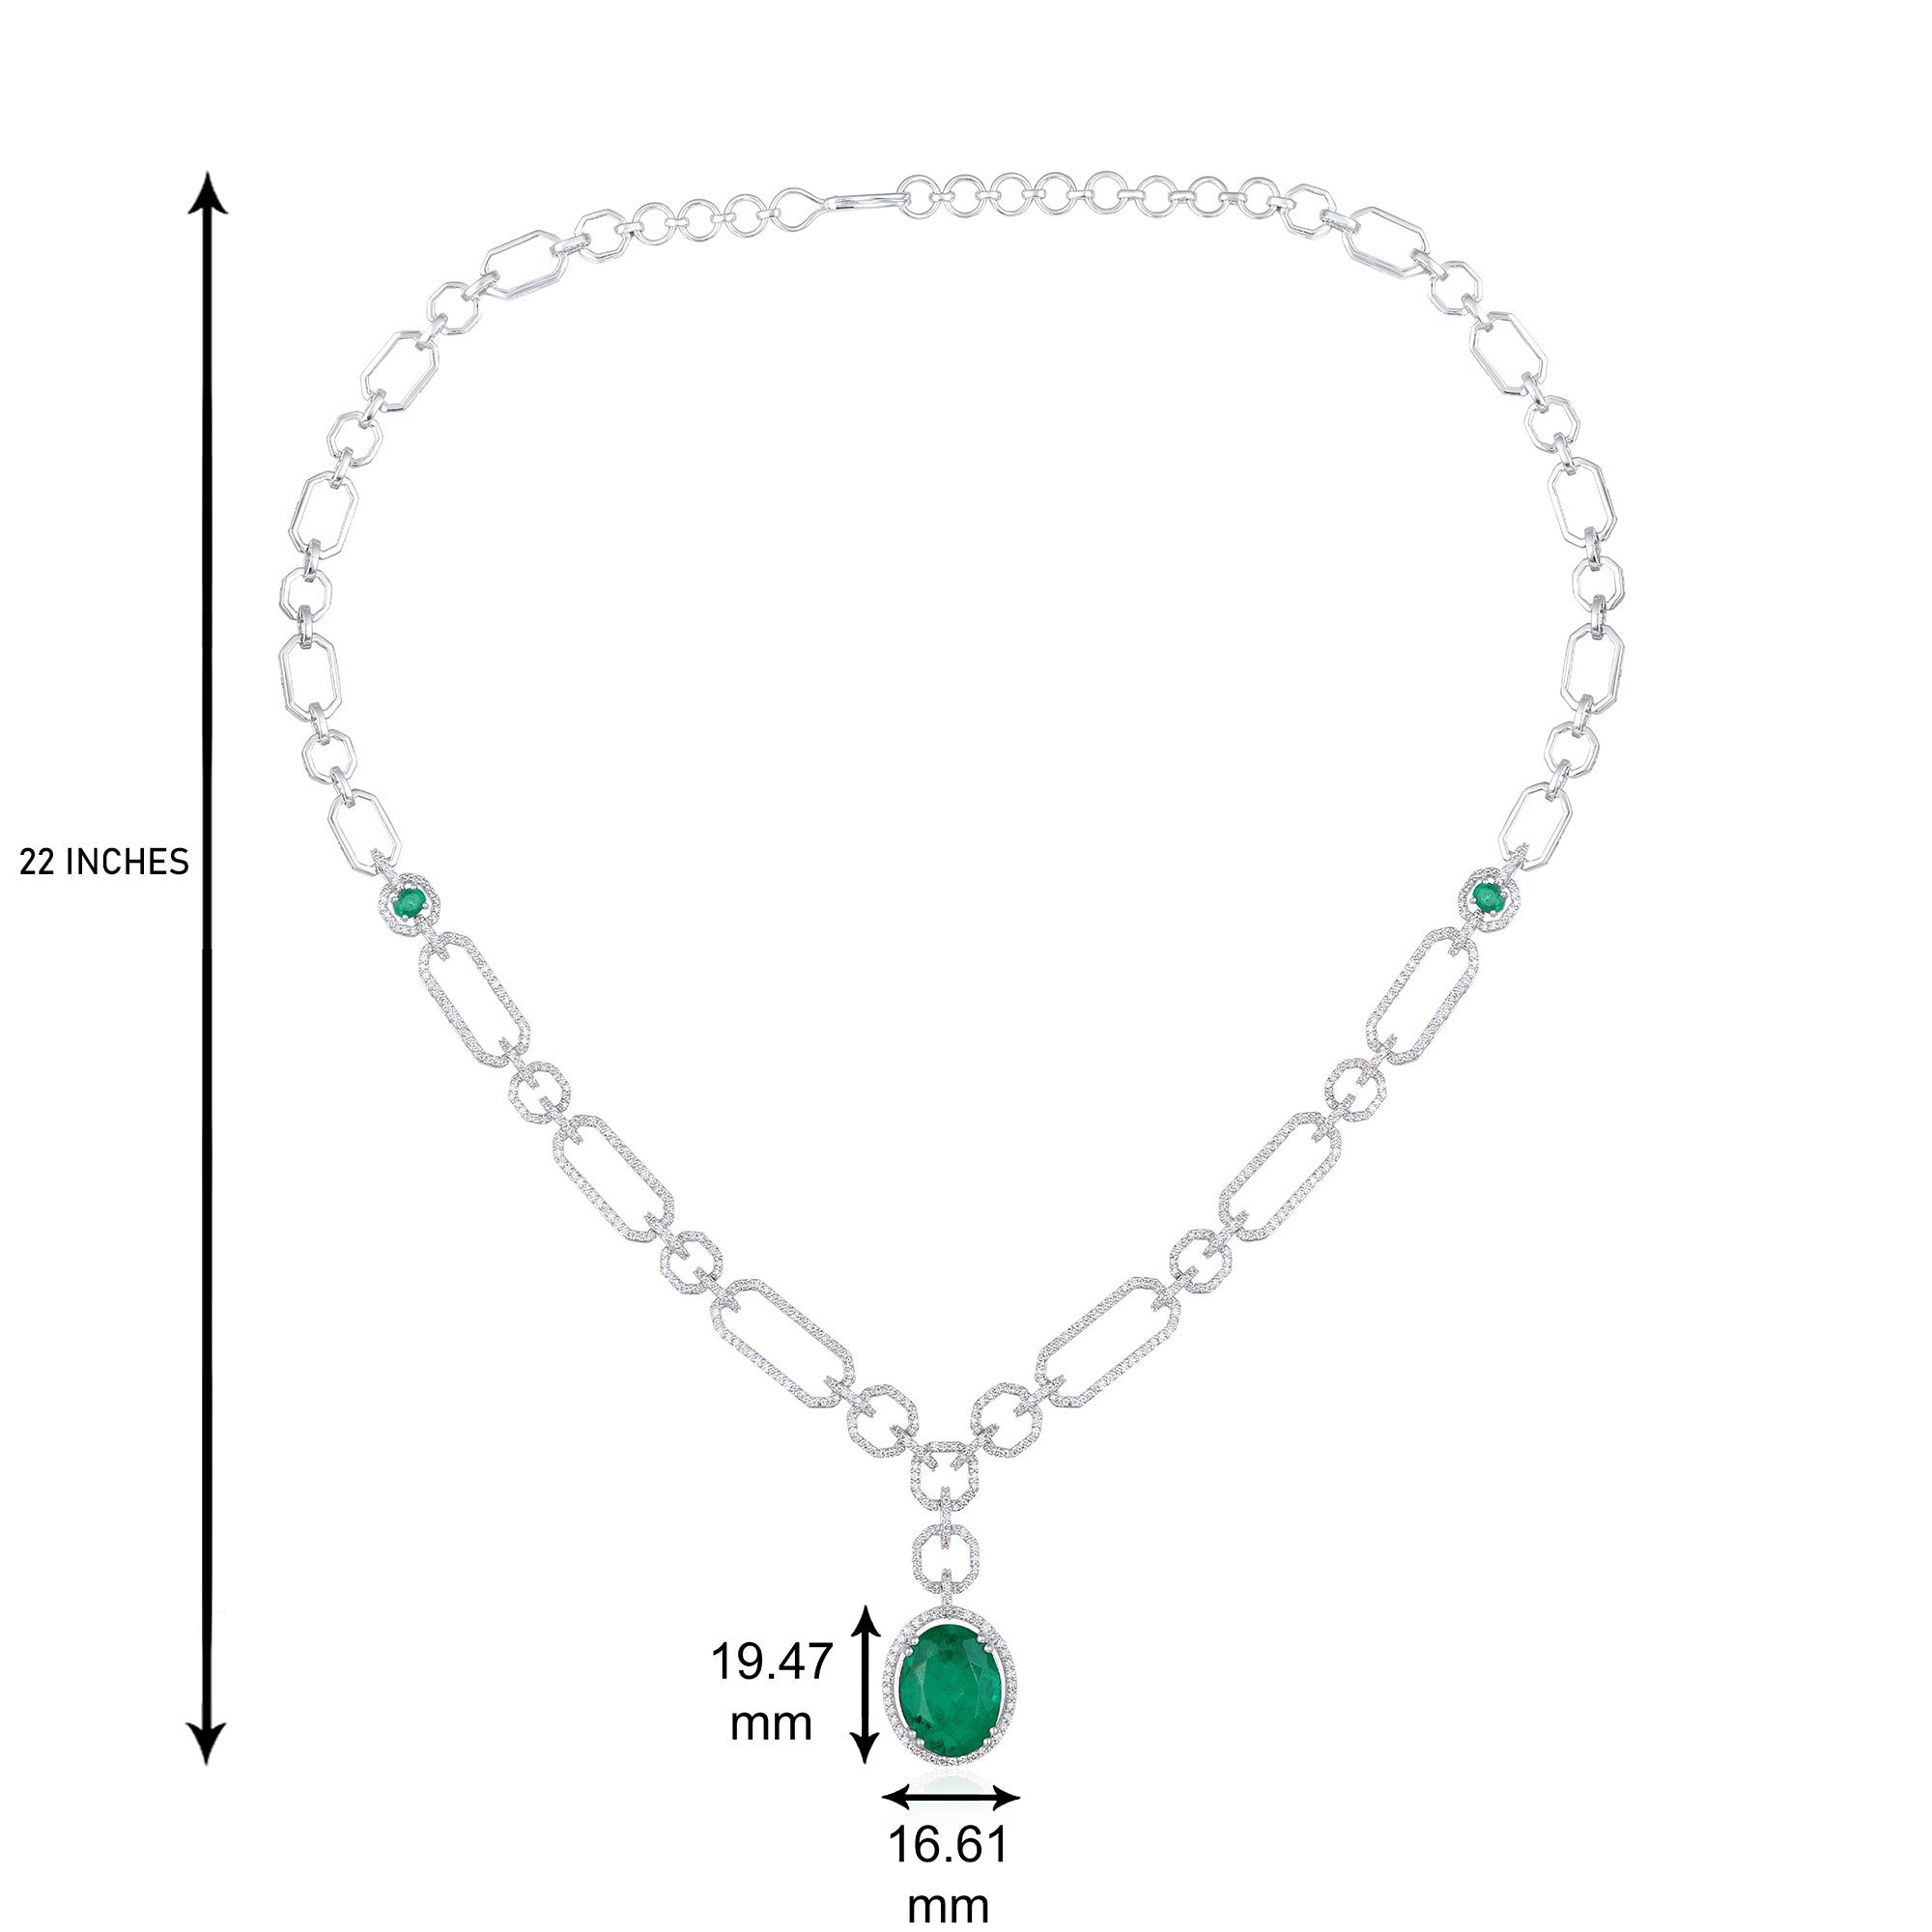 Certified 14K Gold 11.6ct Natural Diamond w/ Simulated Emerald Wedding White Necklace